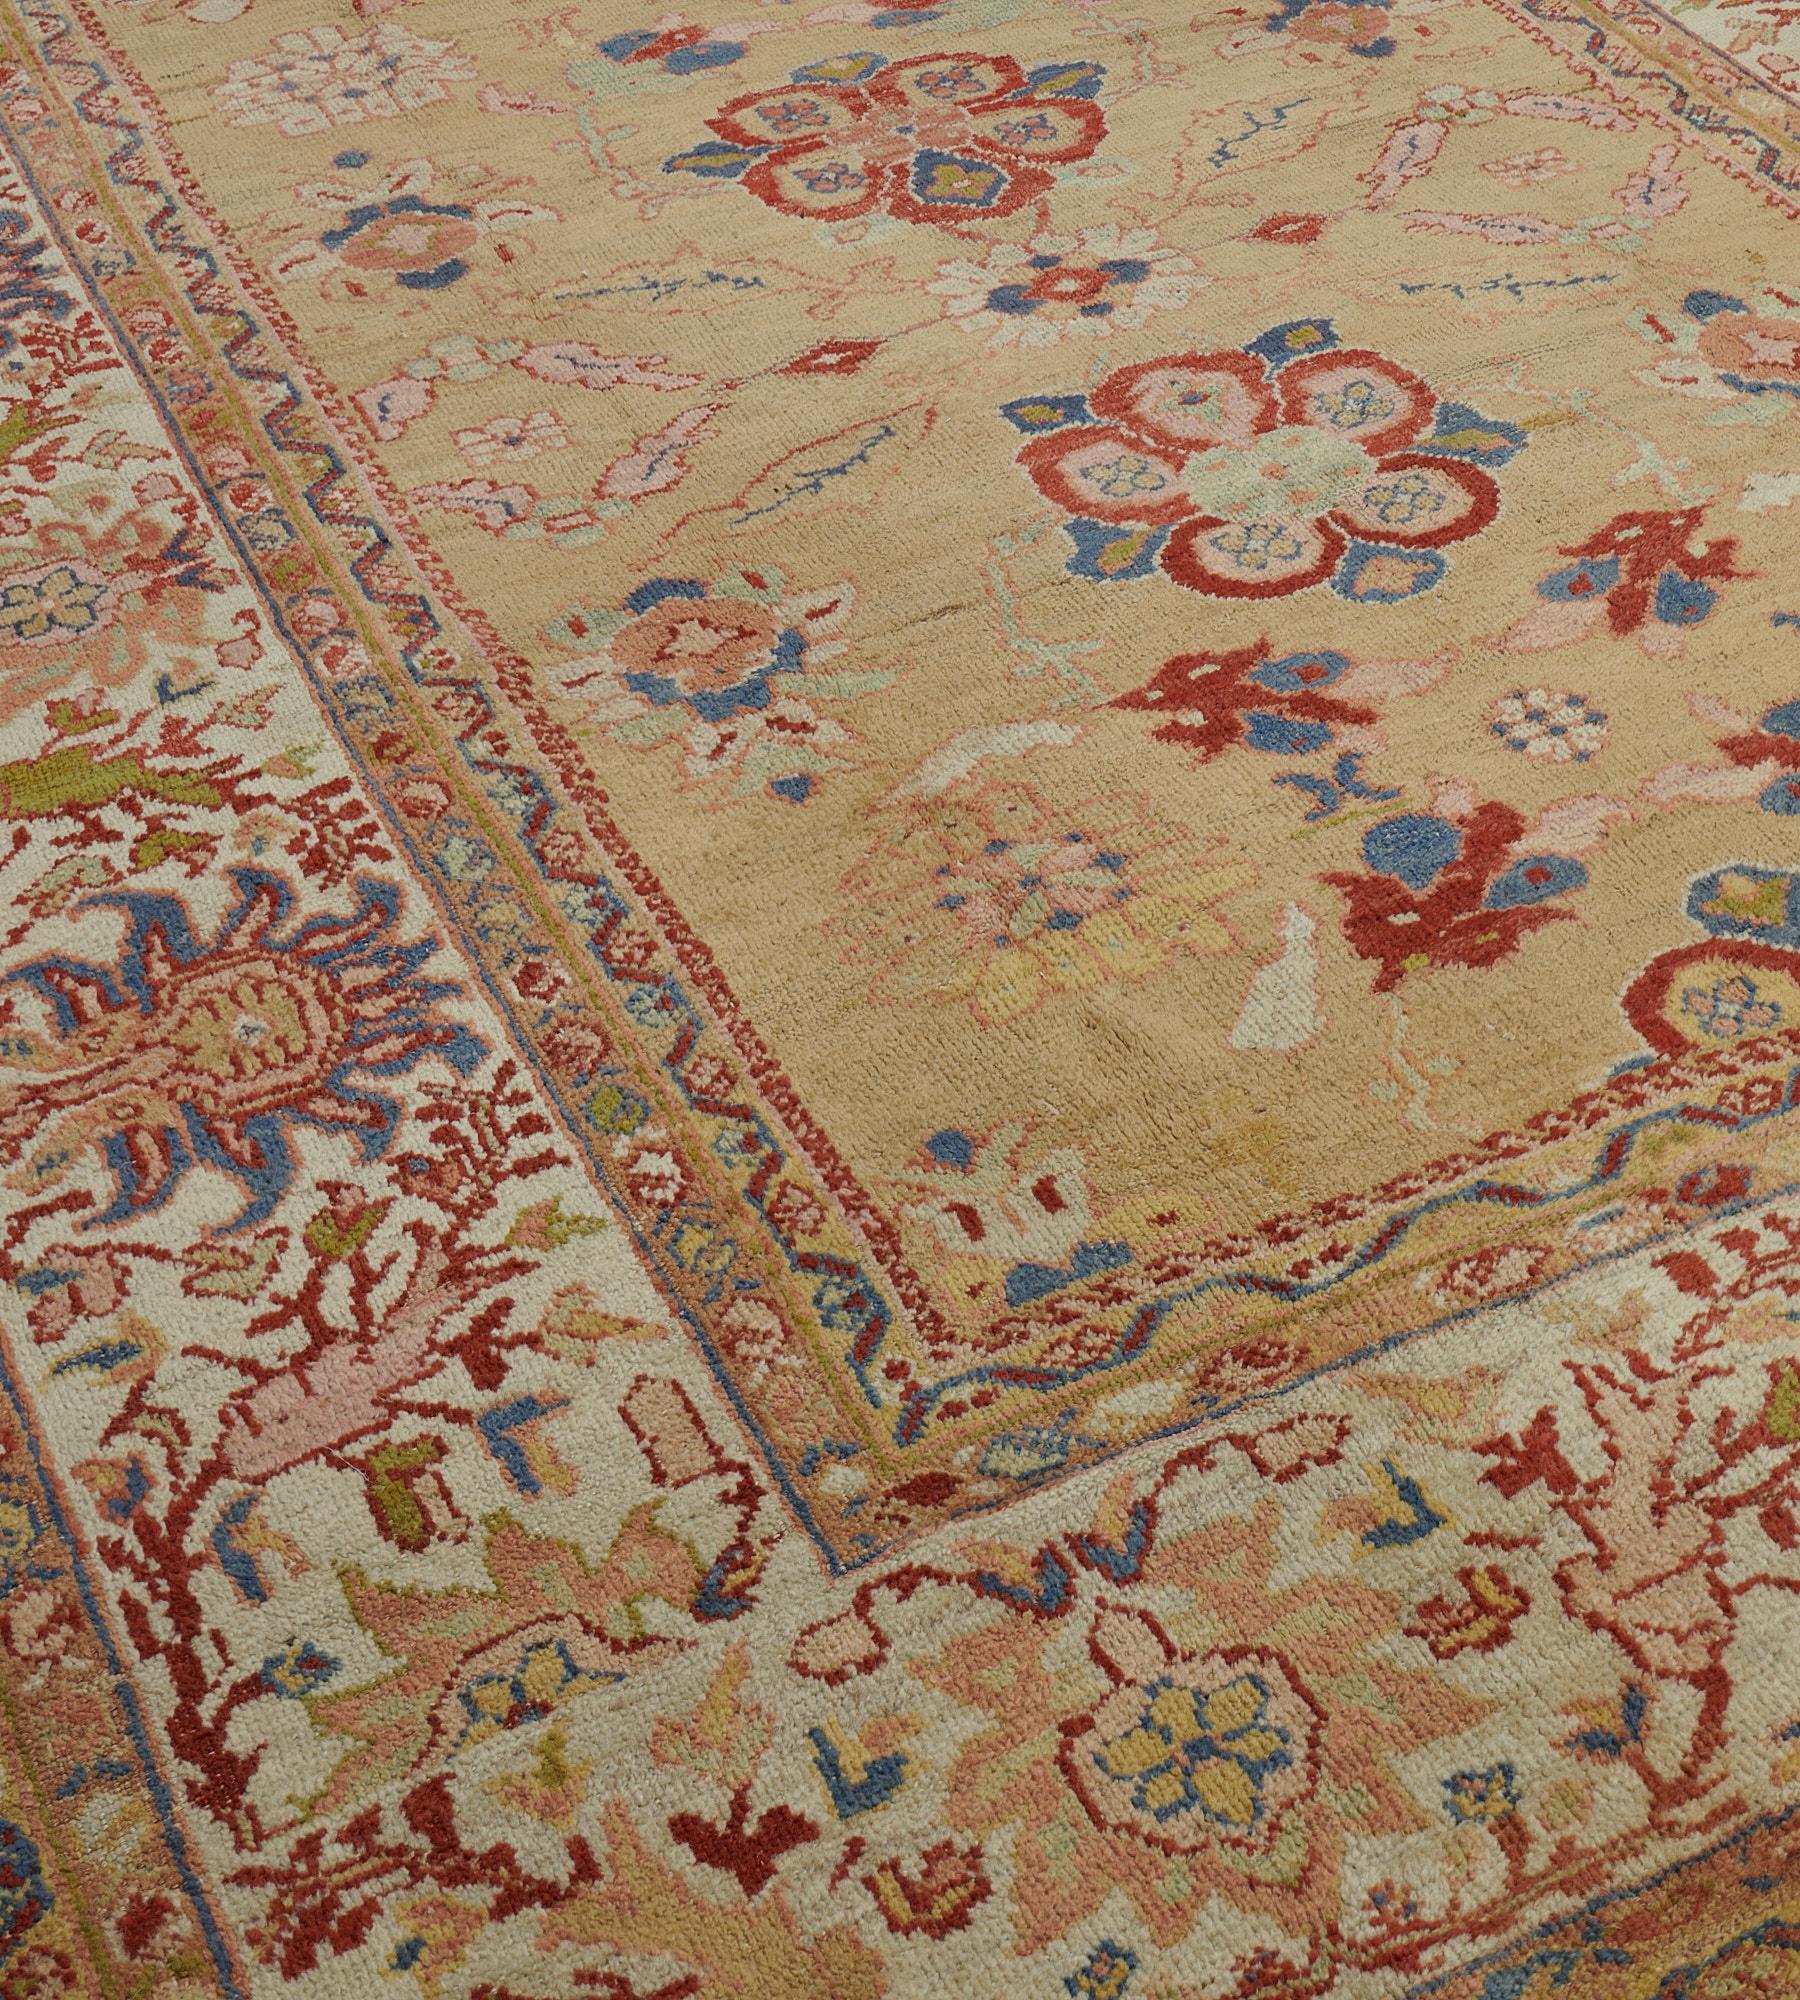 This traditional hand-woven Persian Ziegler Sultanabad rug has a sandy-yellow field with a central column of brick-red open flowerheads and floral motifs flanked by similar smaller ivory flowerheads, in a broad ivory border of polychrome palmette